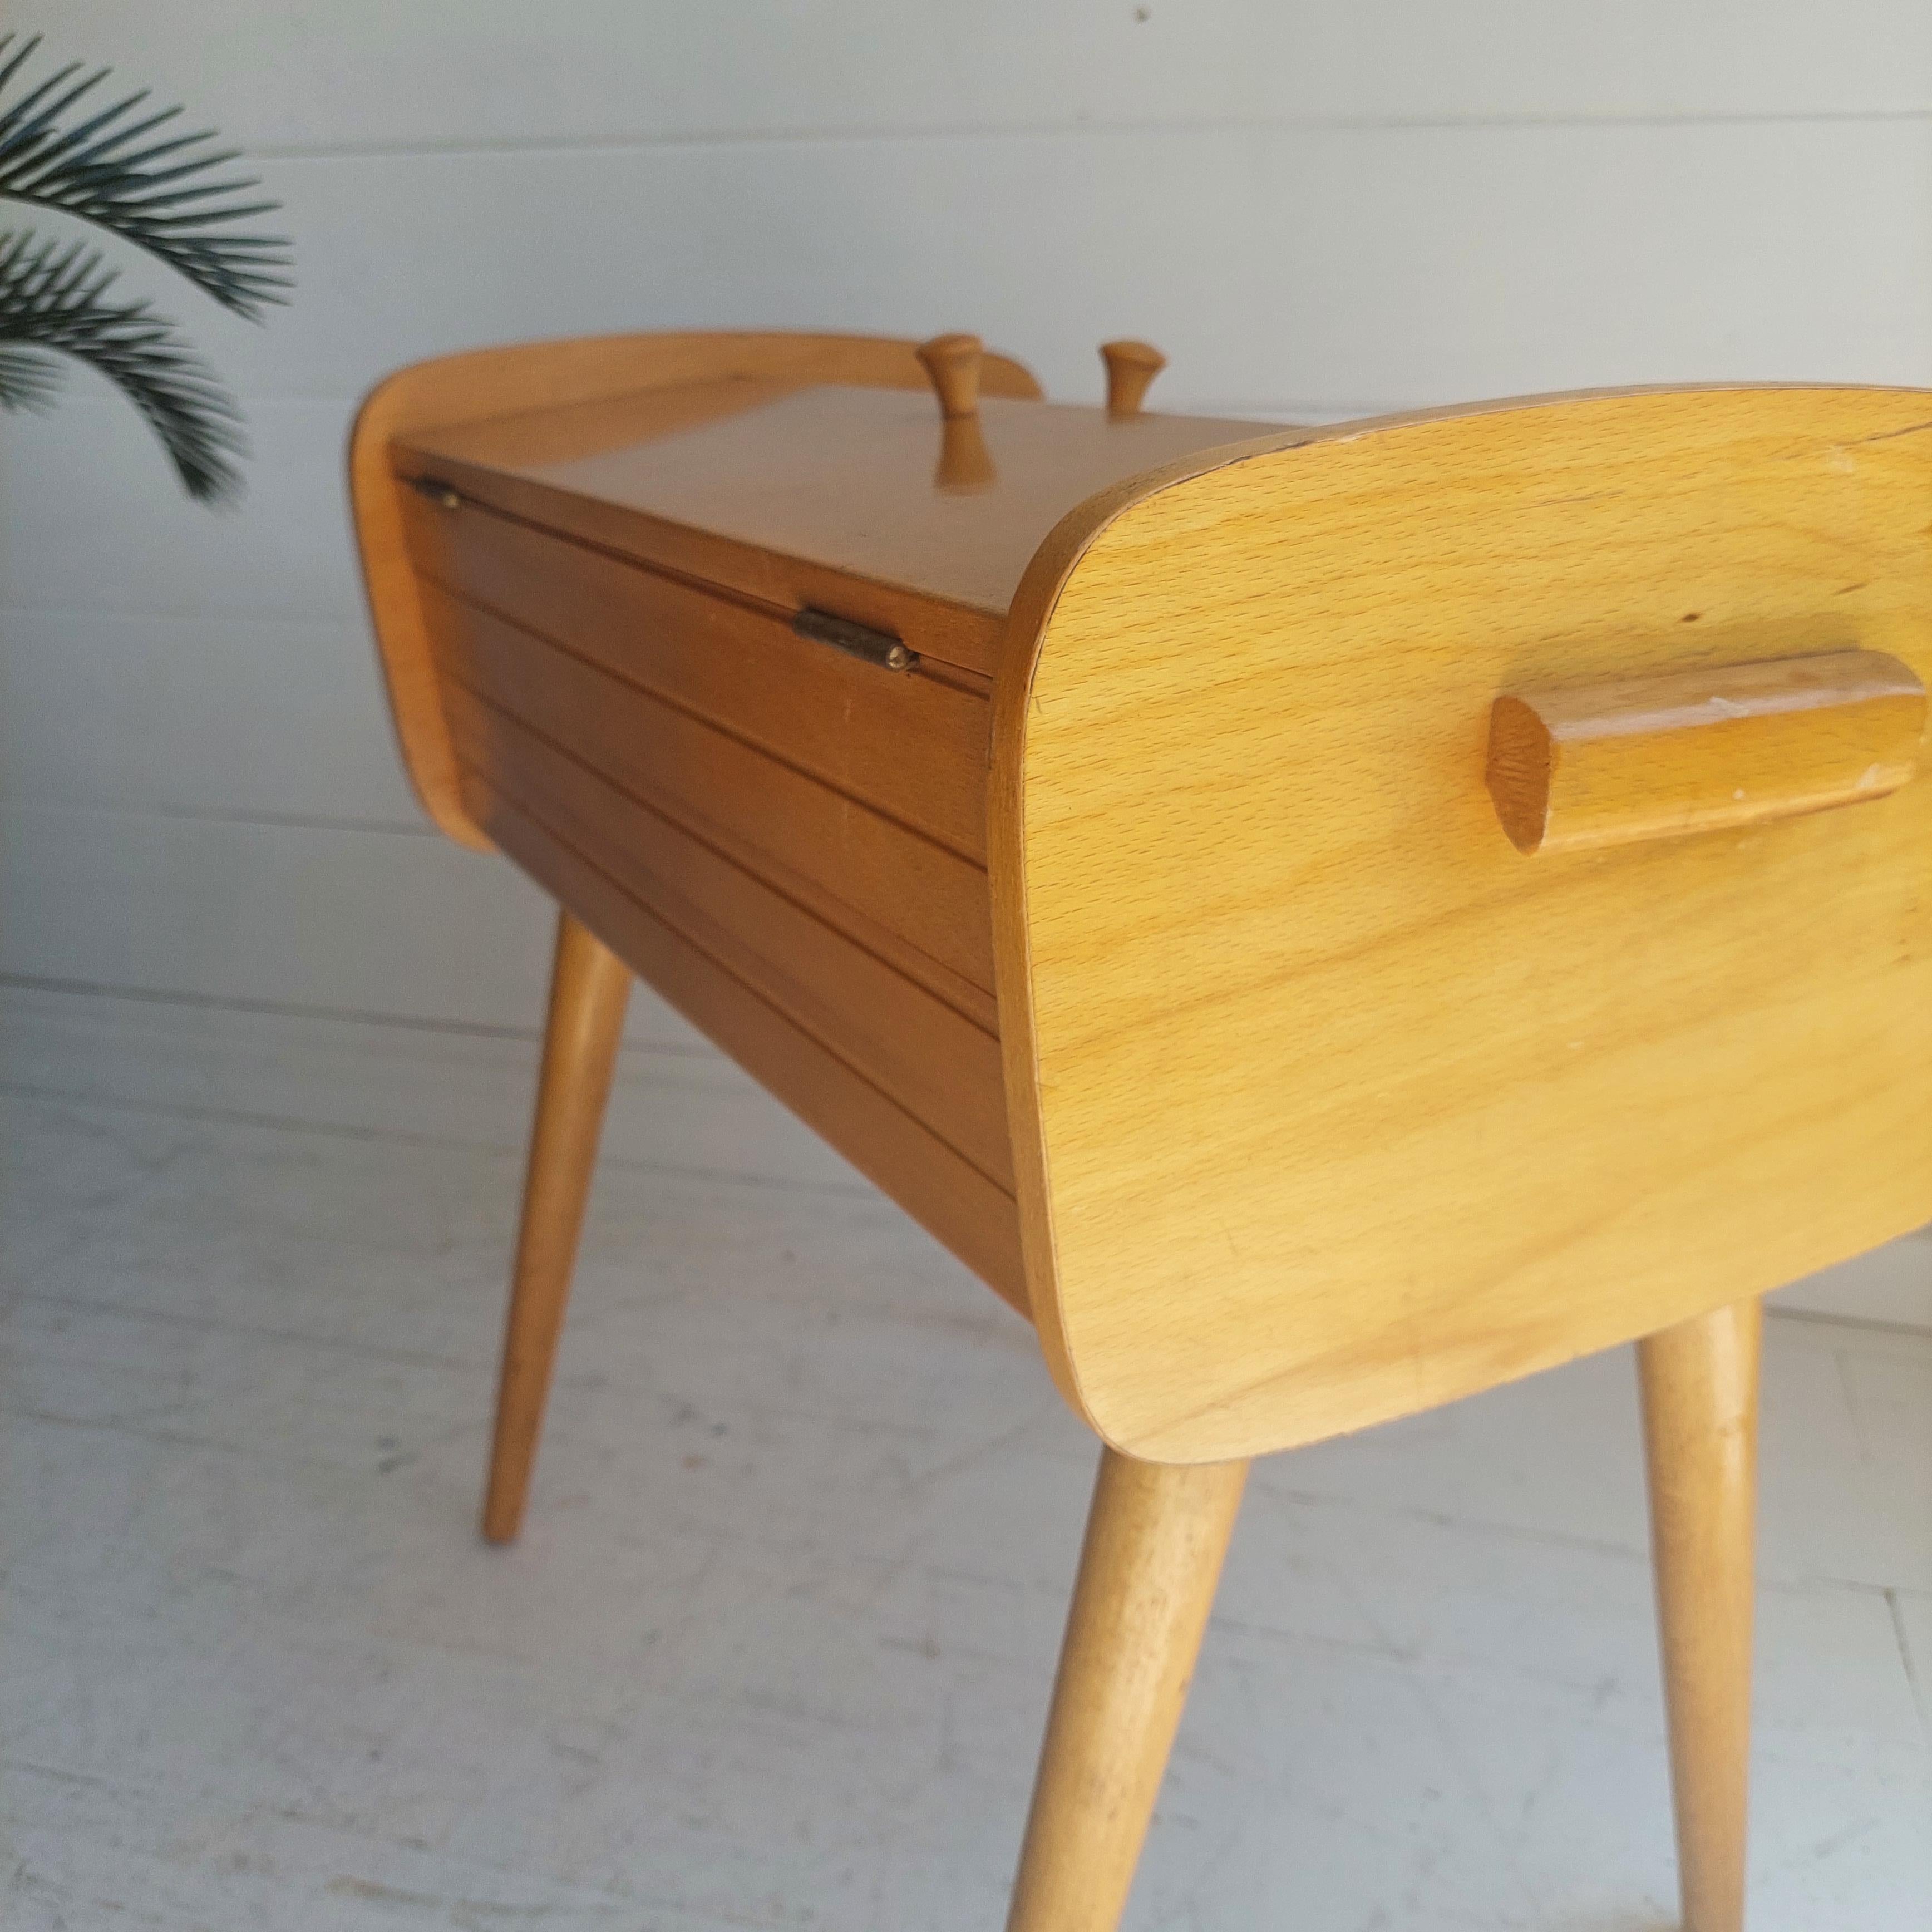 1950s sewing box on legs